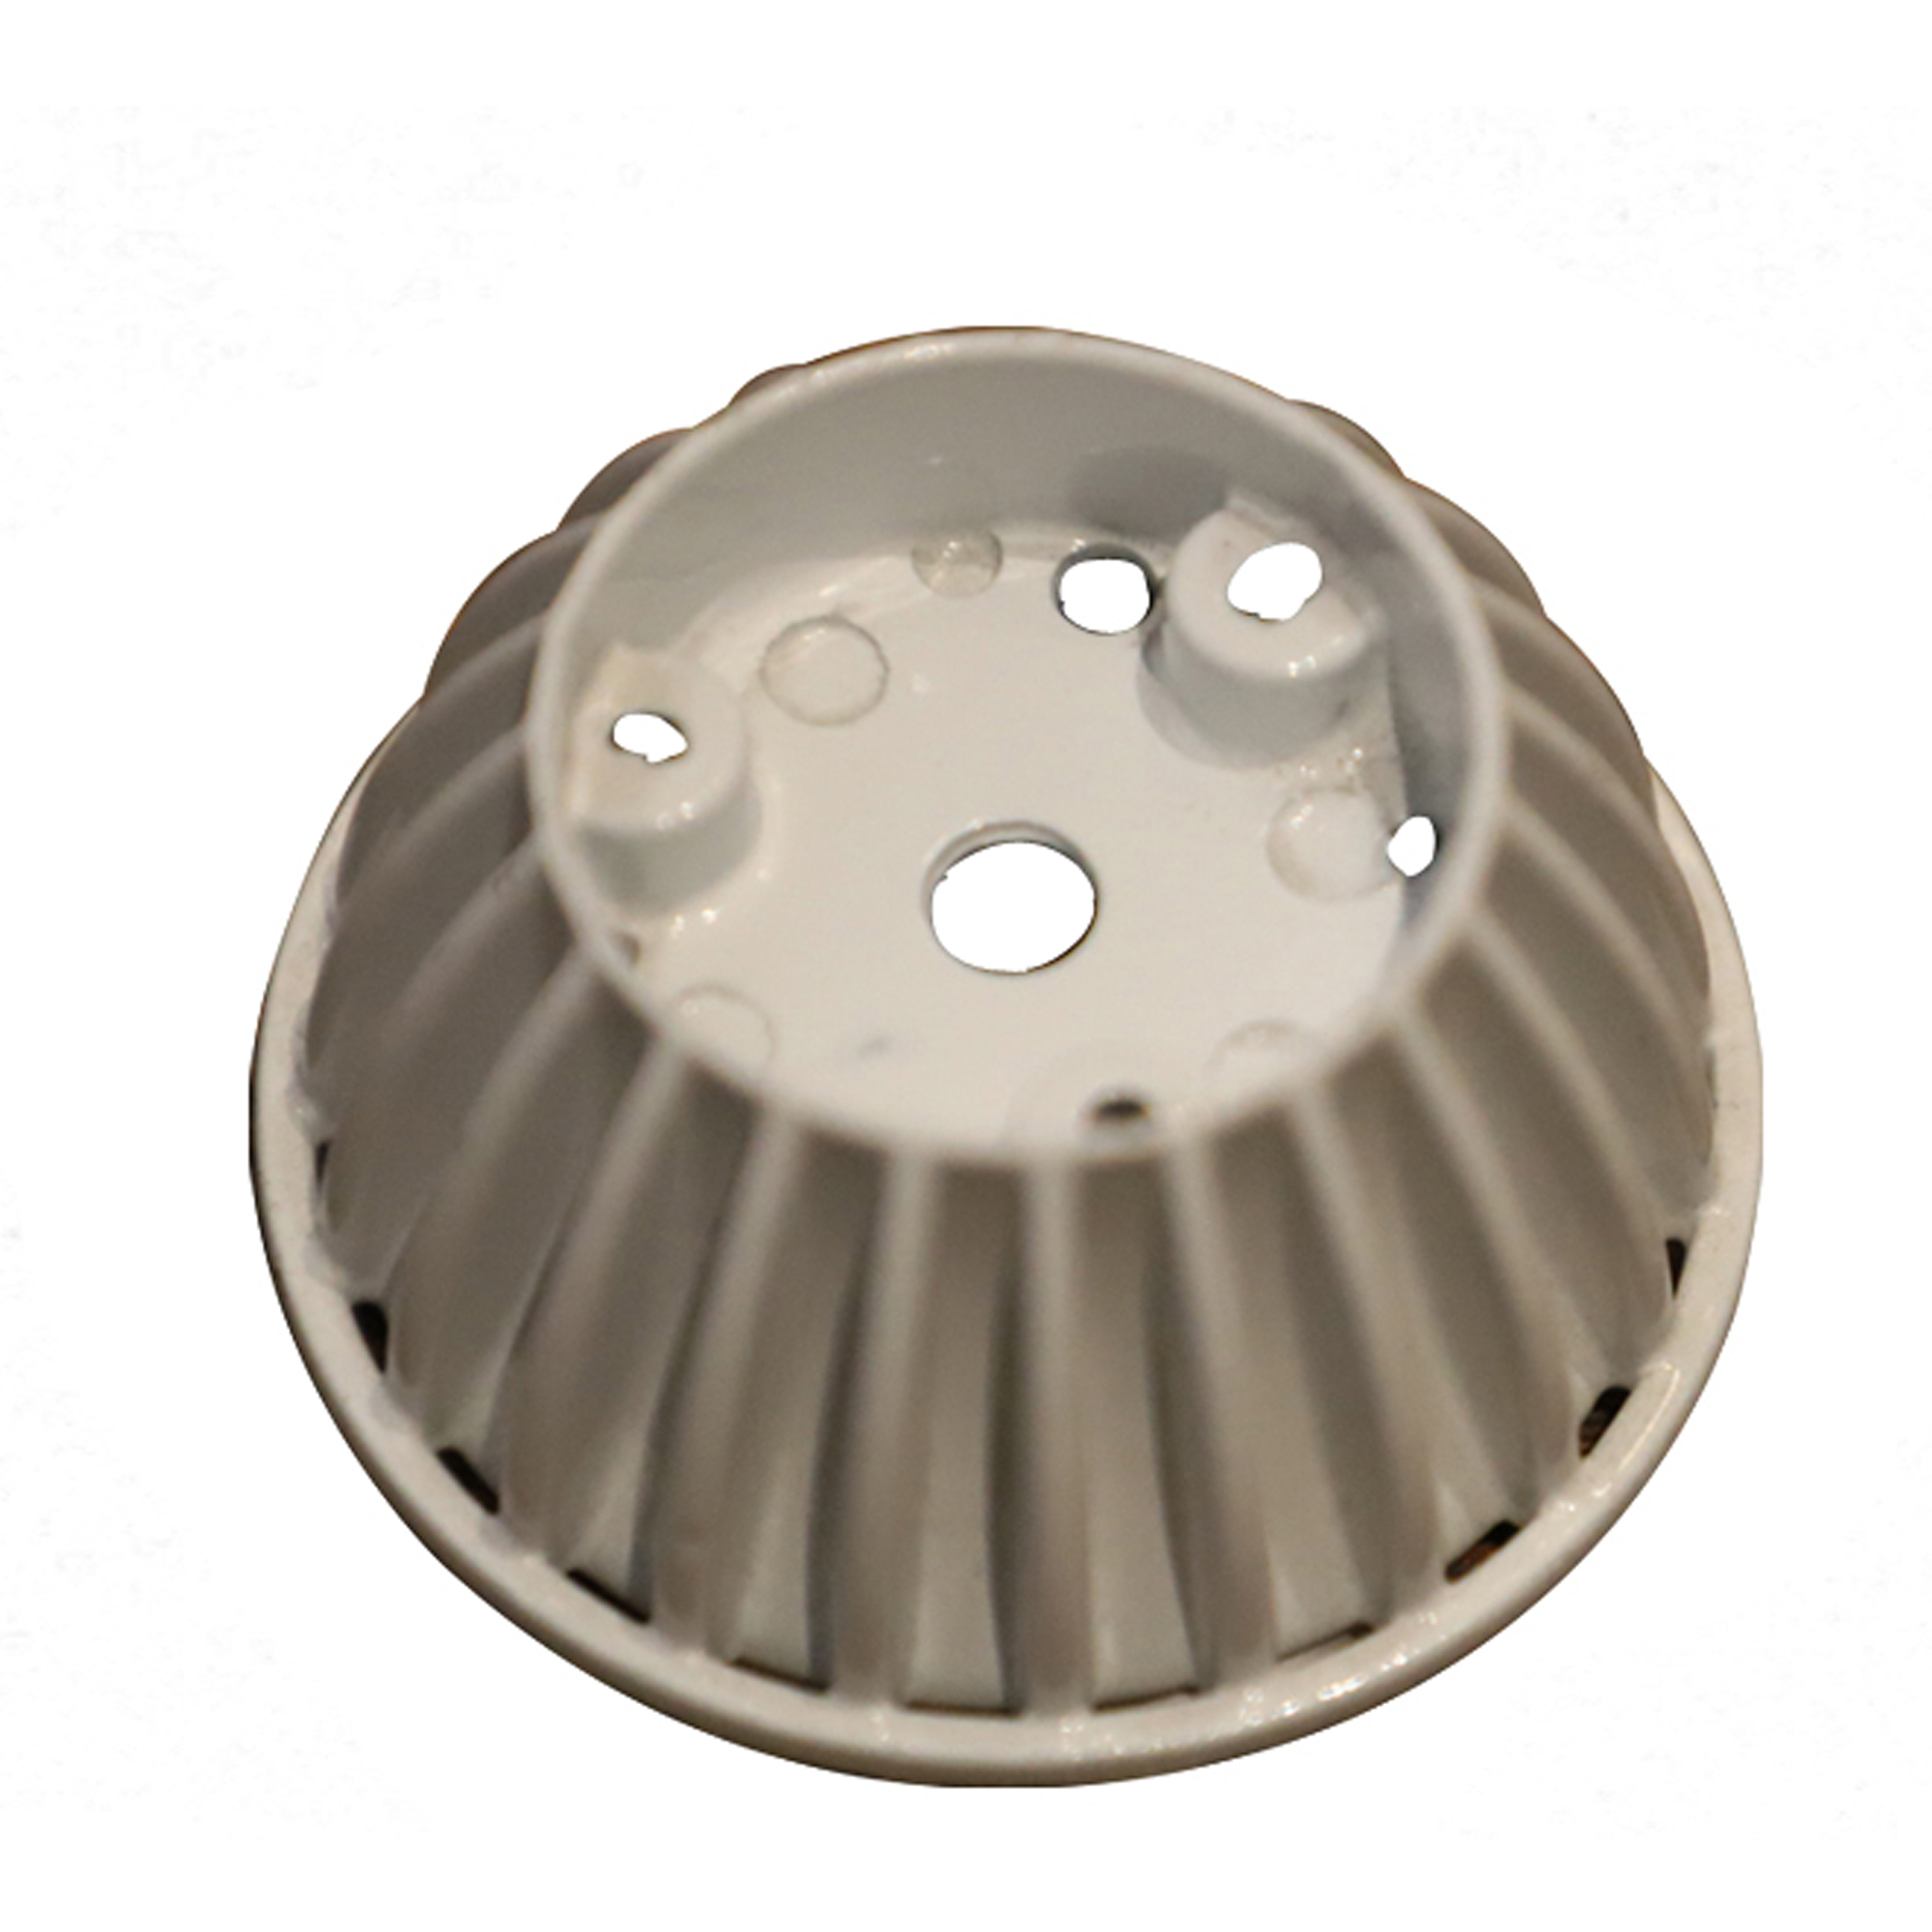 Custom Cold Alloy Accessories Led Mount Adjustable Die Casting(图4)